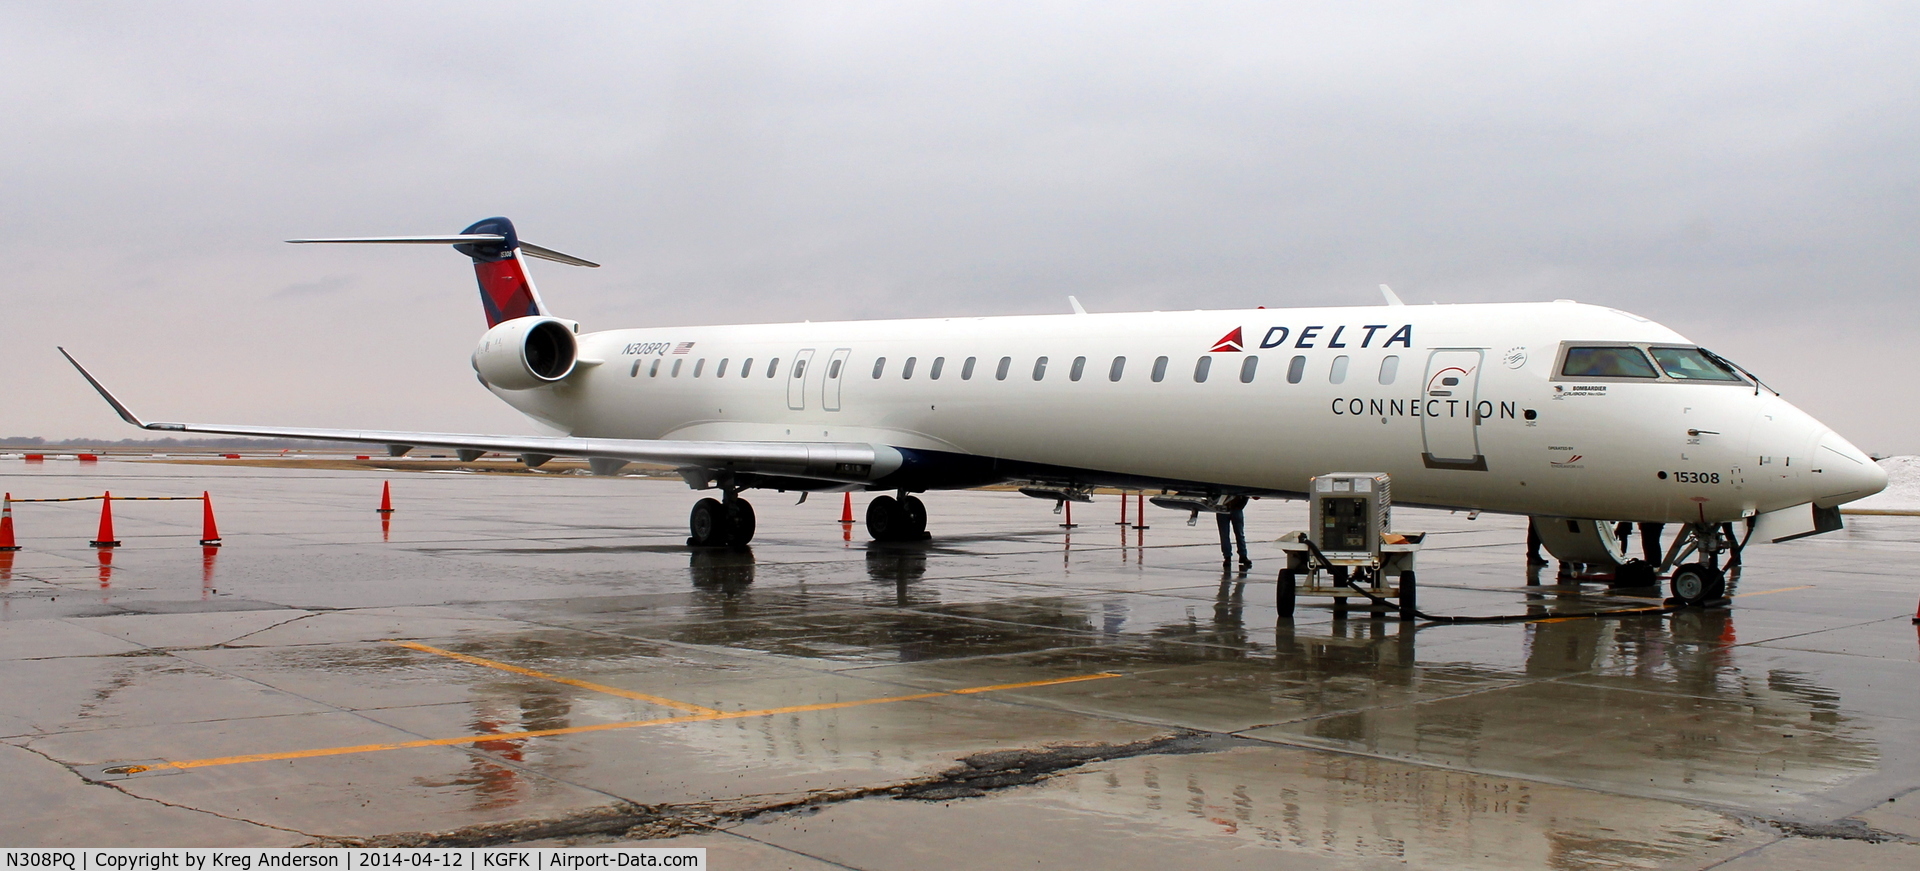 N308PQ, 2014 Bombardier CRJ-900LR (CL-600-2D24) C/N 15308, Bombarder CRJ-900ER operated by Endeavor Air dba Delta Connection on display at UND Aerospace at the University of North Dakota.